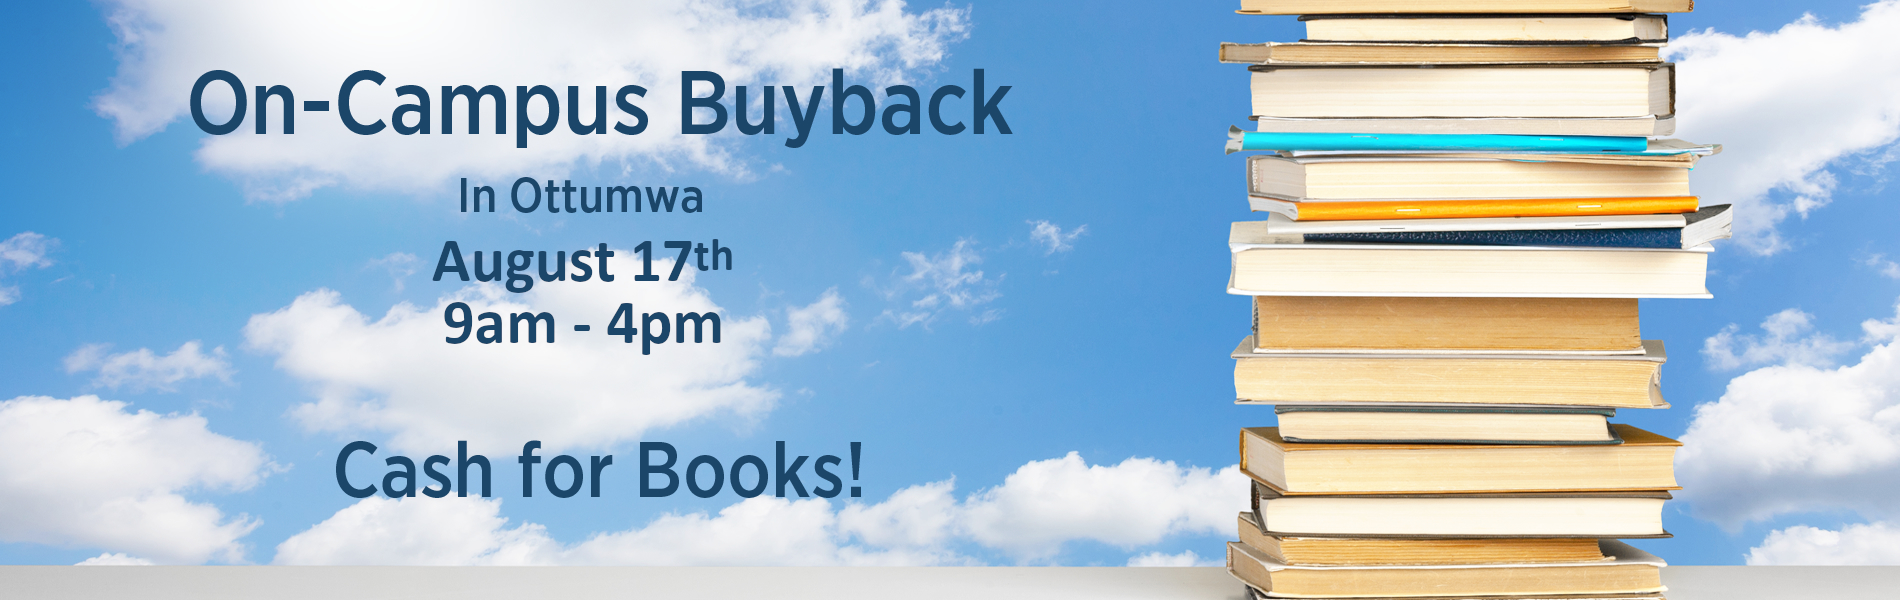 On campus buyback August 17th 9am - 4pm